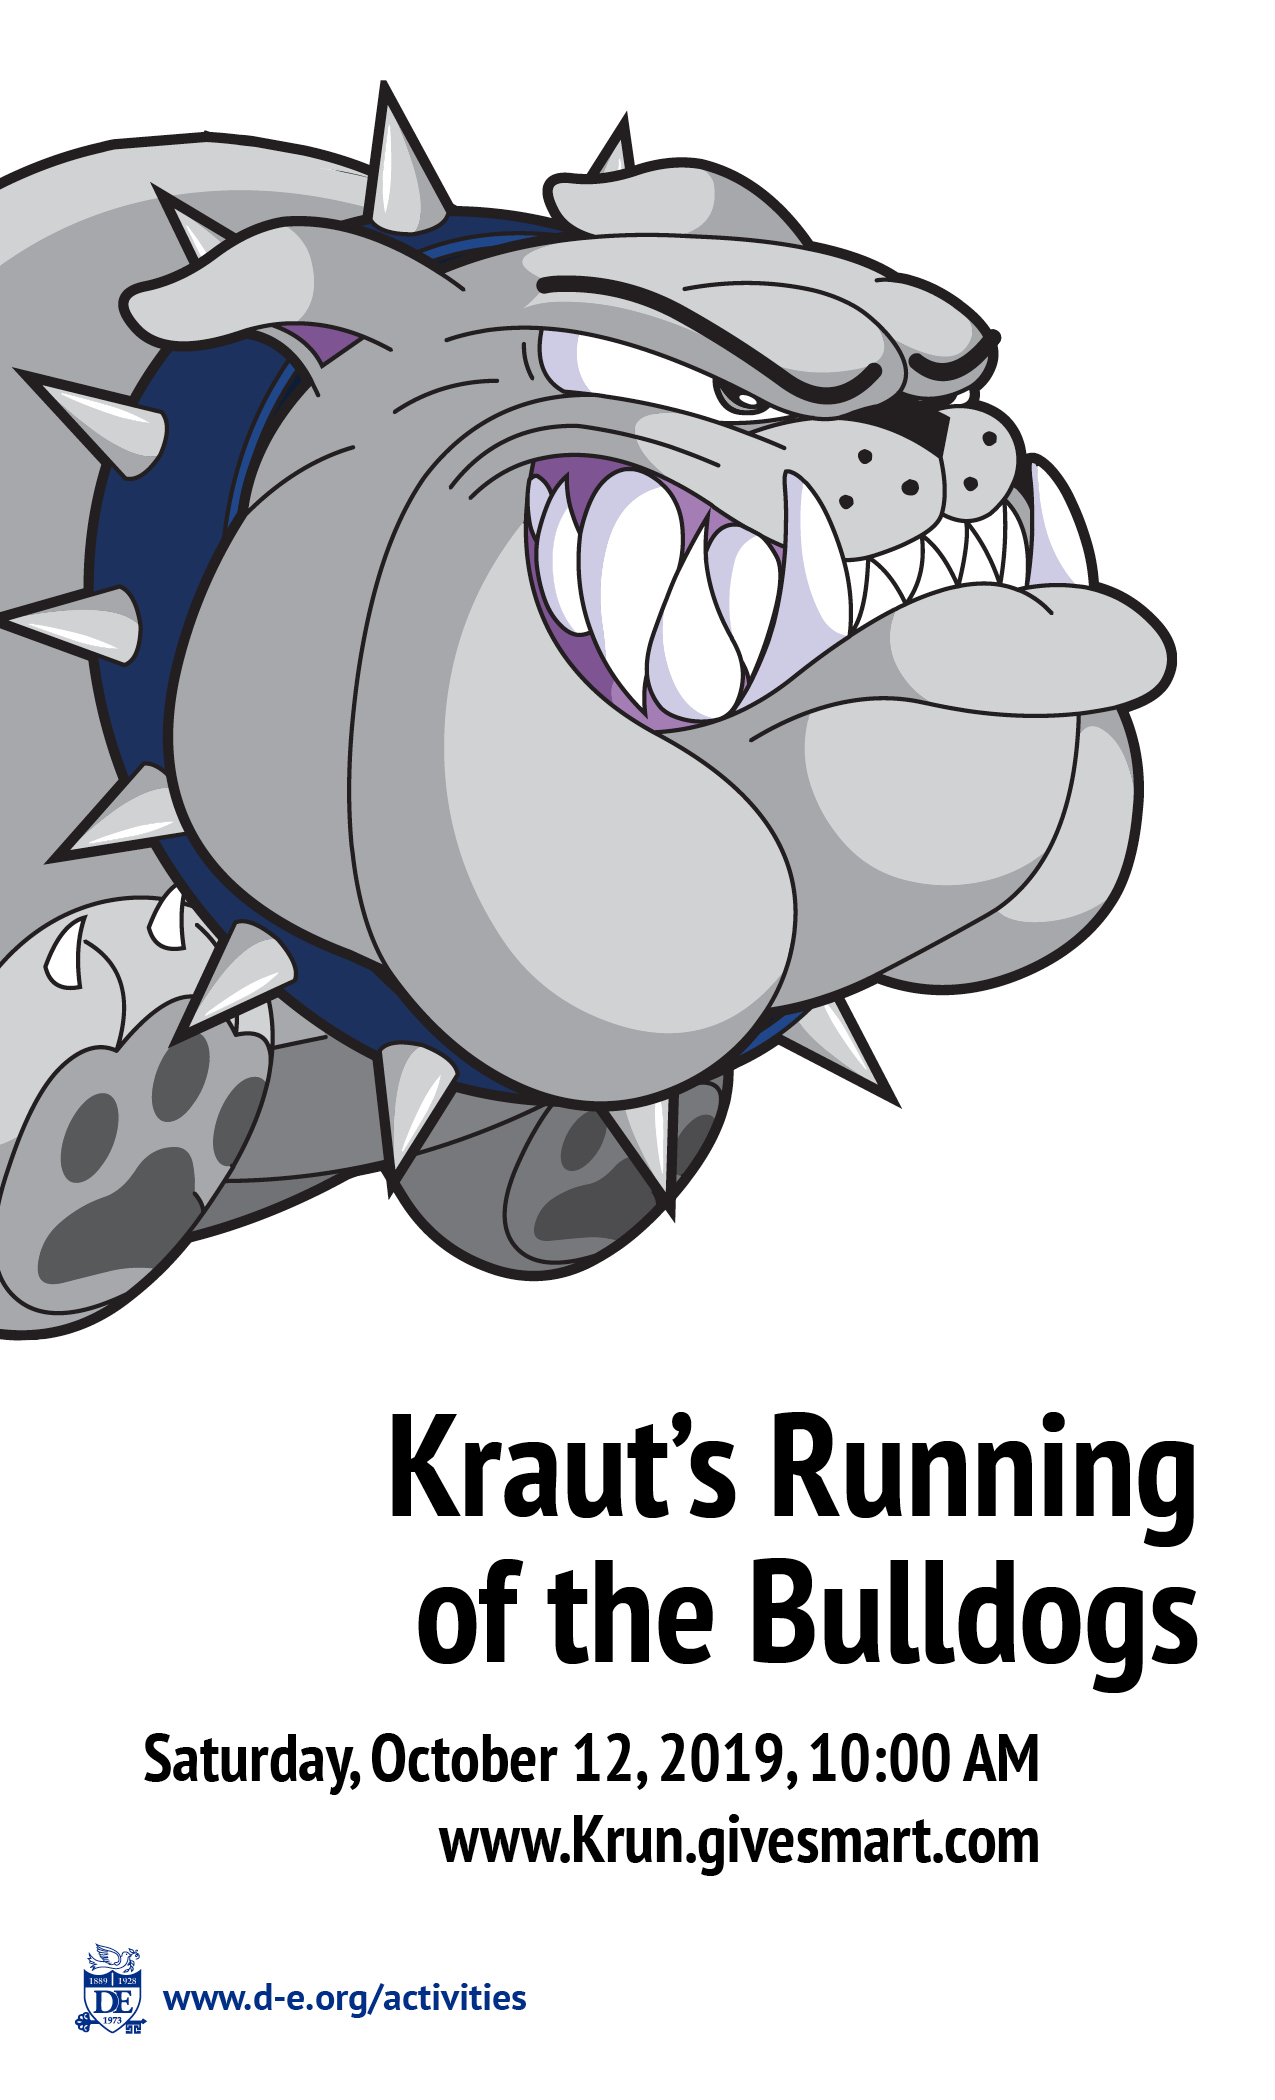 5TH ANNUAL KRAUT’S RUNNING OF THE BULLDOGS